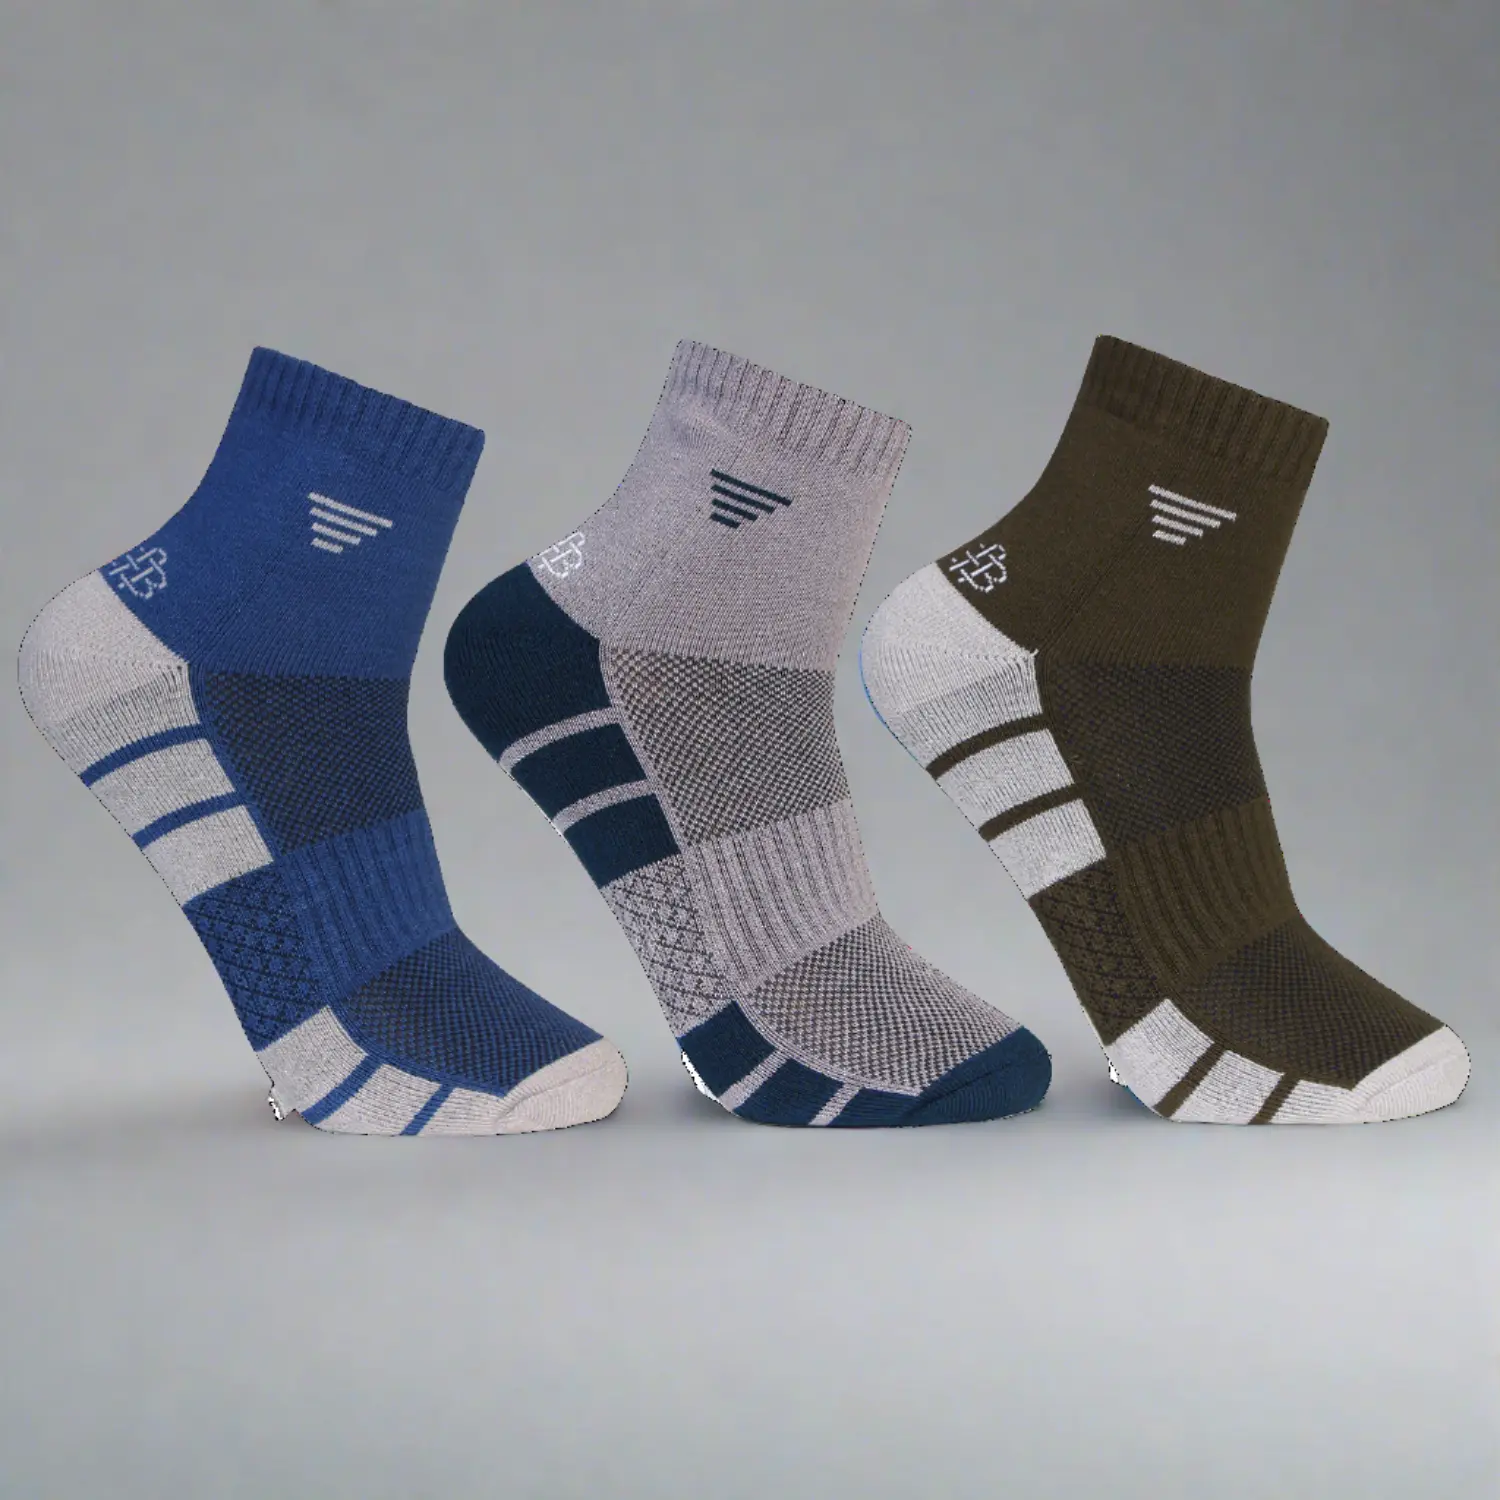 Introducing Bamboo Socks: Your Sustainable Comfort Solution 